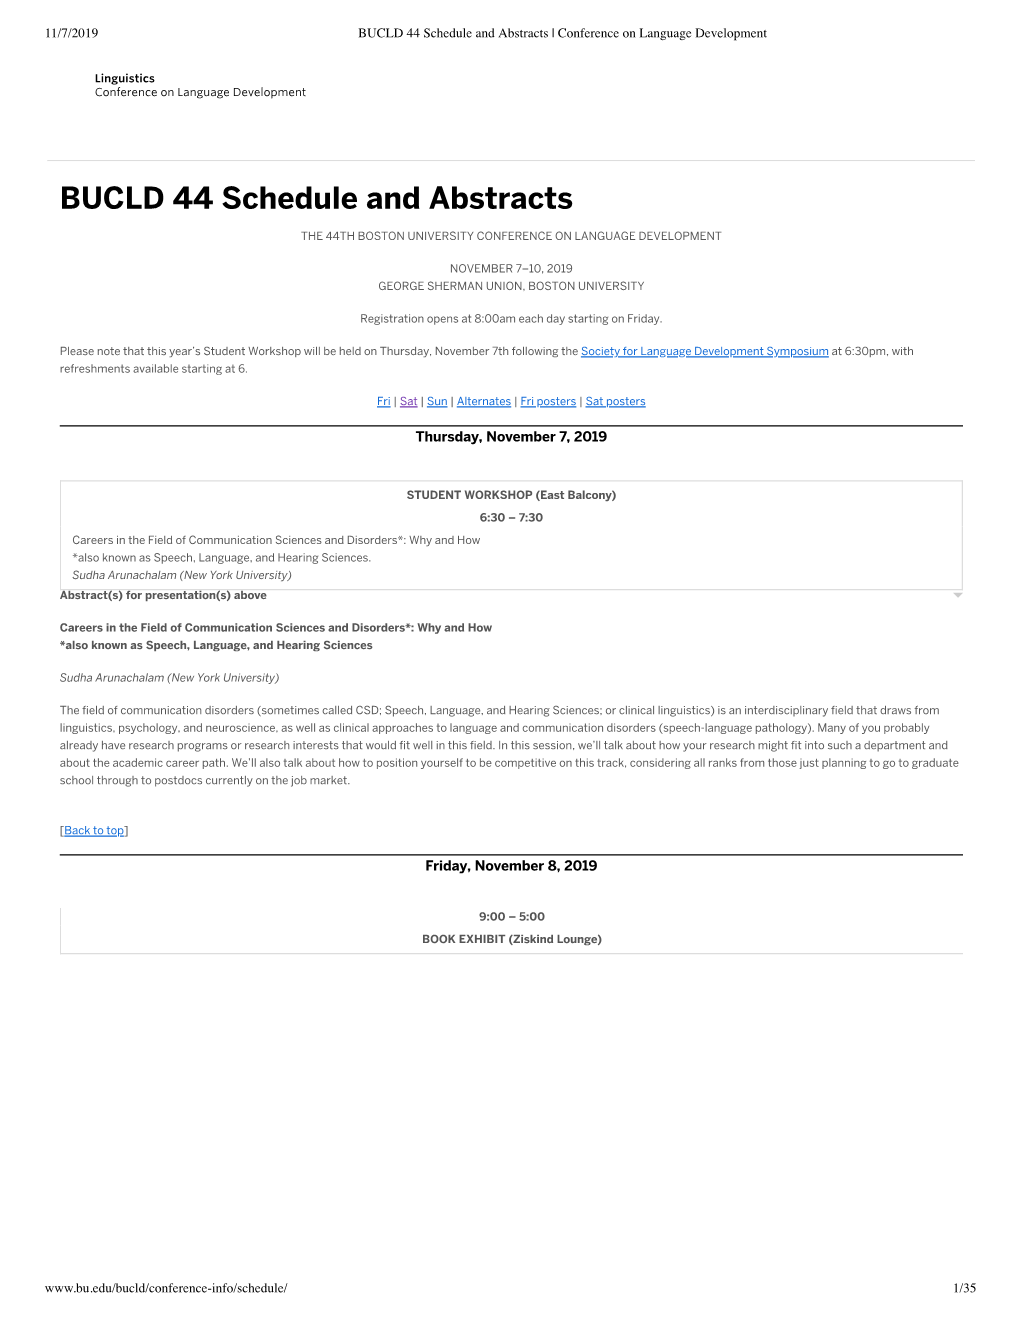 BUCLD 44 Schedule and Abstracts | Conference on Language Development